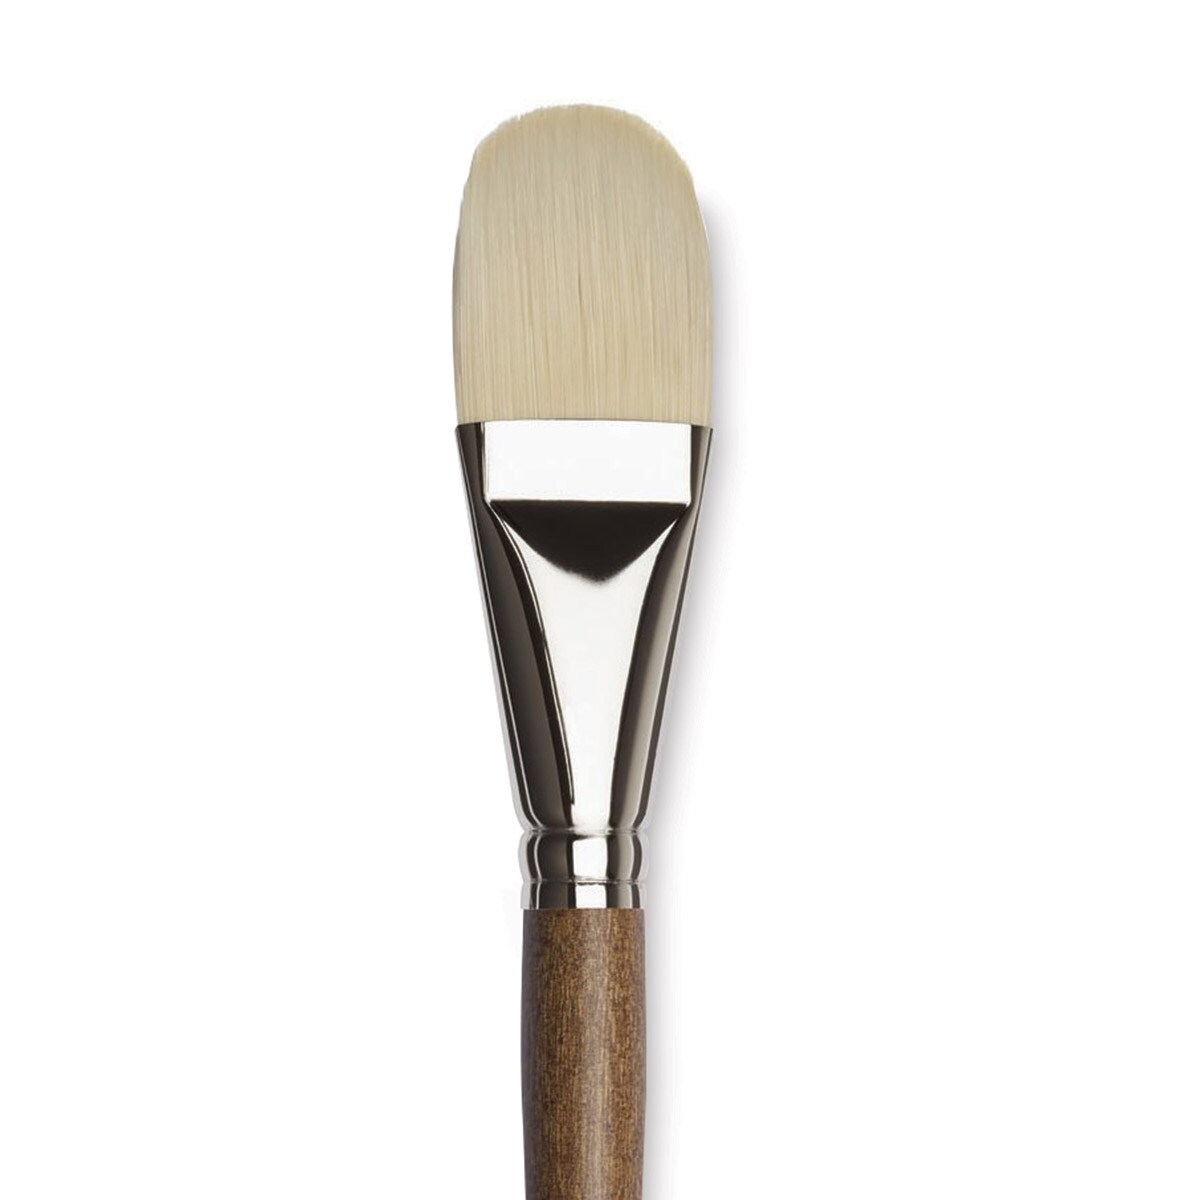 Artists' Oil Synthetic Hog Brush